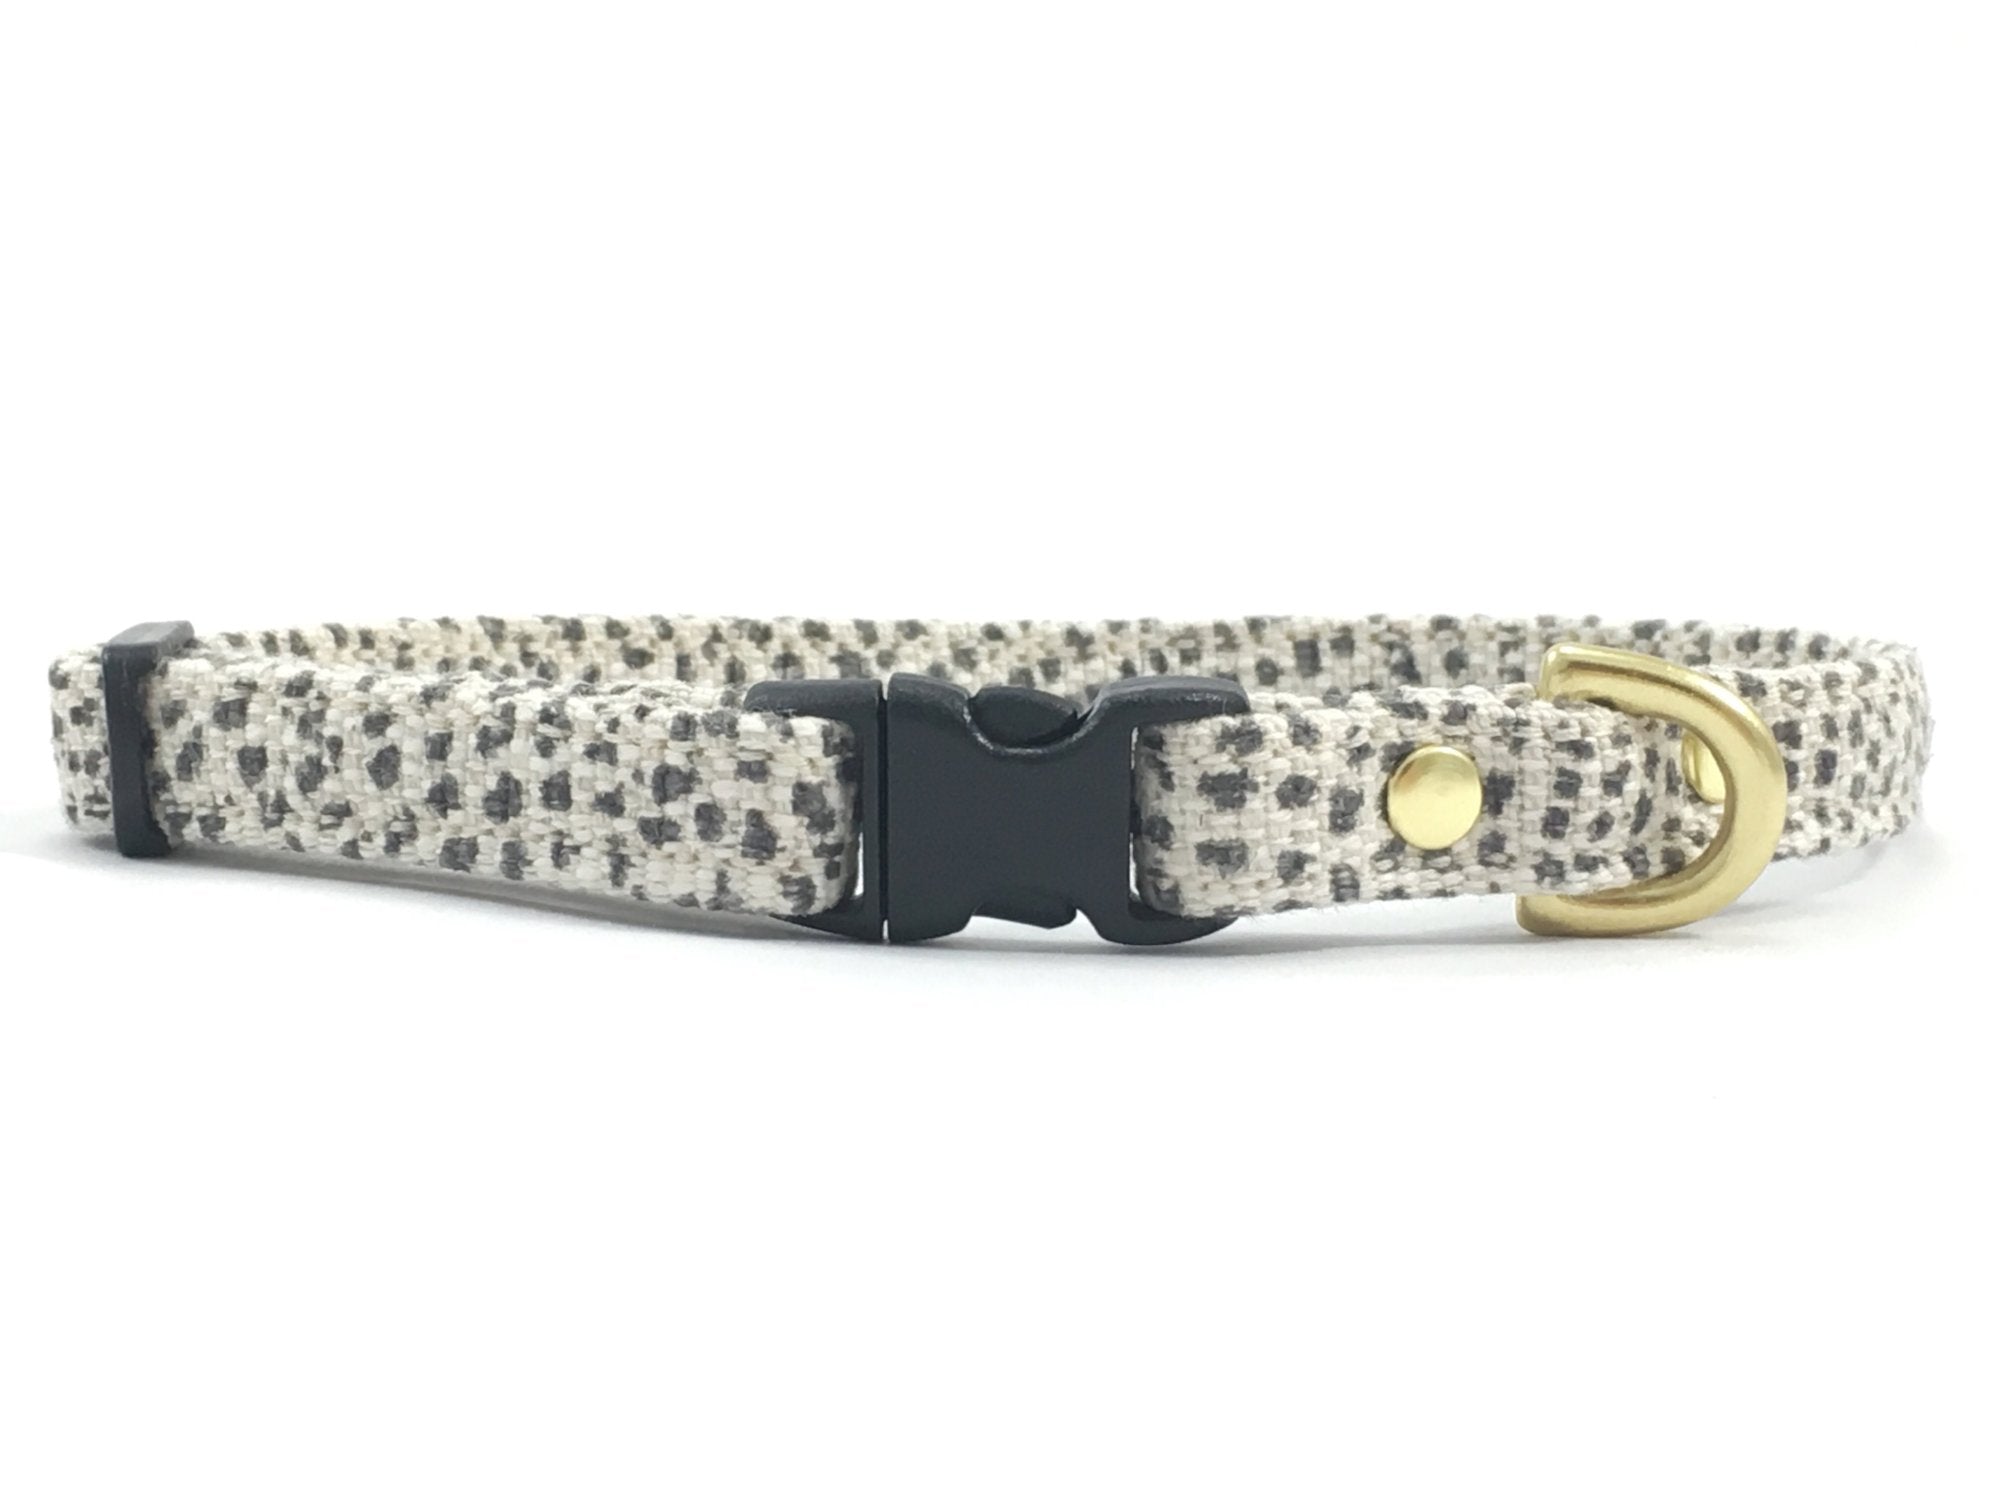 Miniature/toy dog collar in luxury grey polka dot cotton/linen with black buckle and slider and solid brass hardware